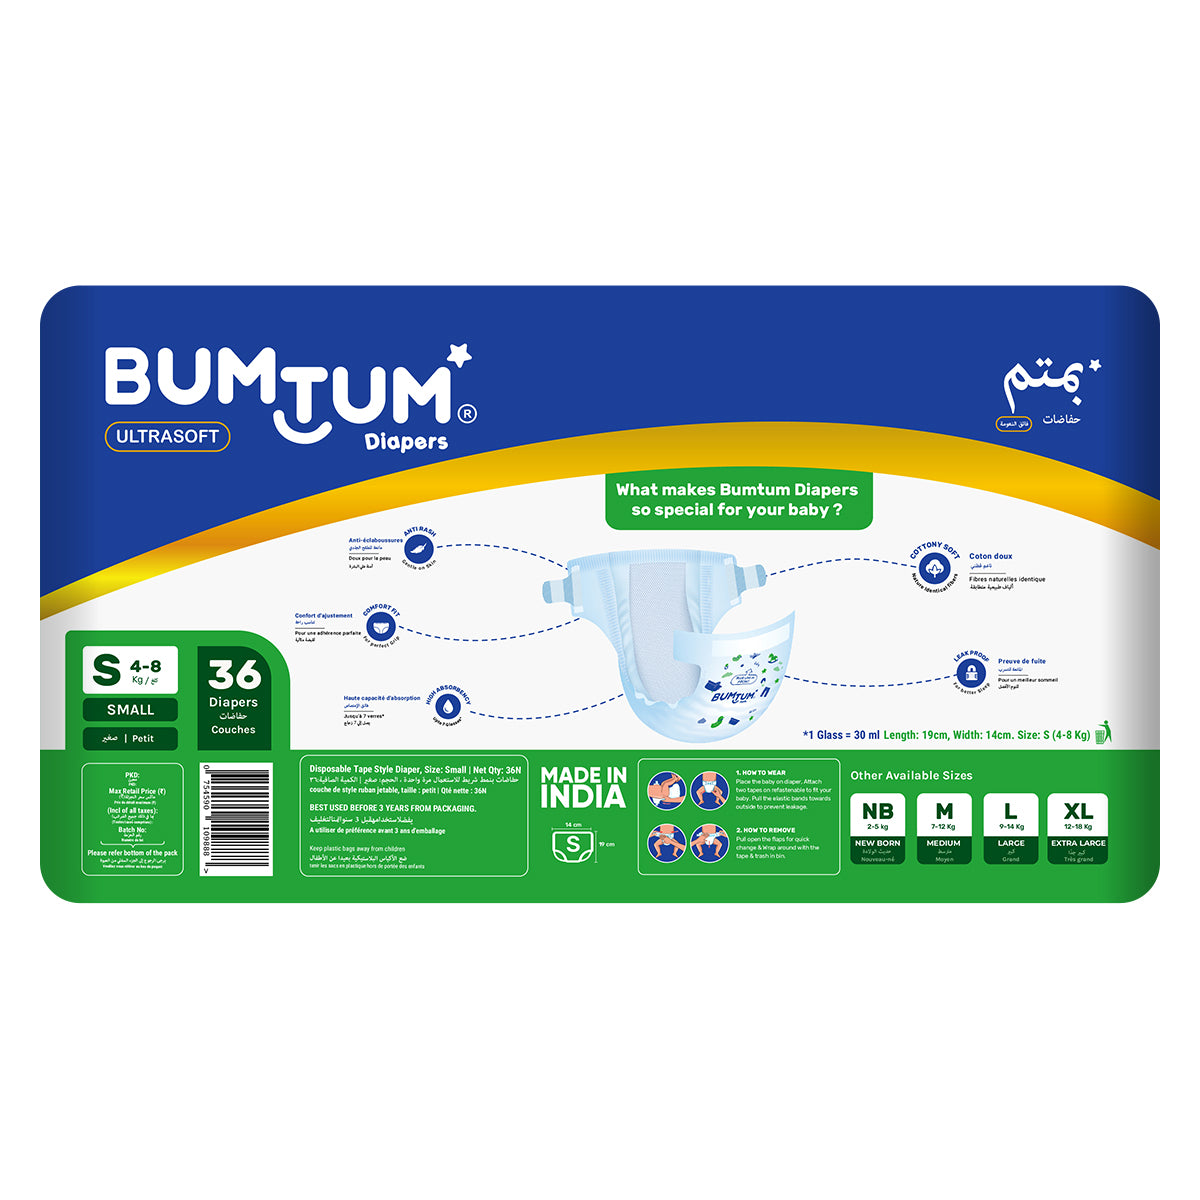 BUMTUM Baby Diaper Pants Double Layer Leakage Protection High Absorb  Technology - XXXL - Buy 24 BUMTUM Pant Diapers